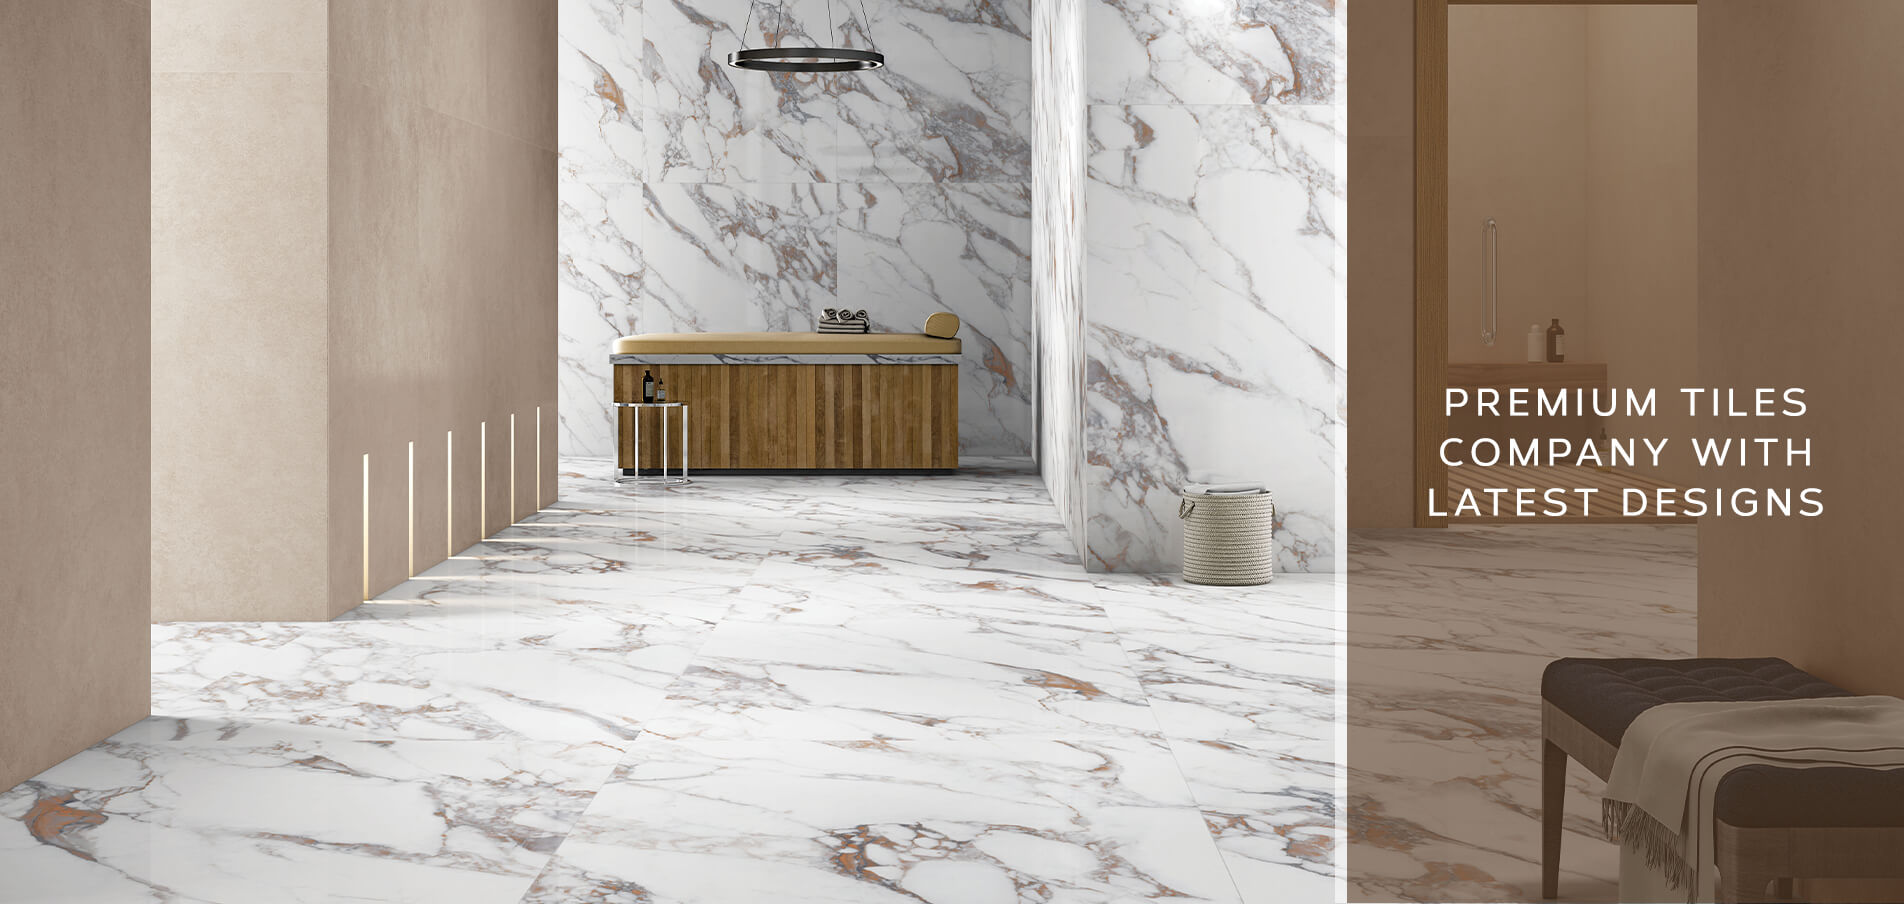 Premium Tiles Company With the Latest Designs: Simpolo